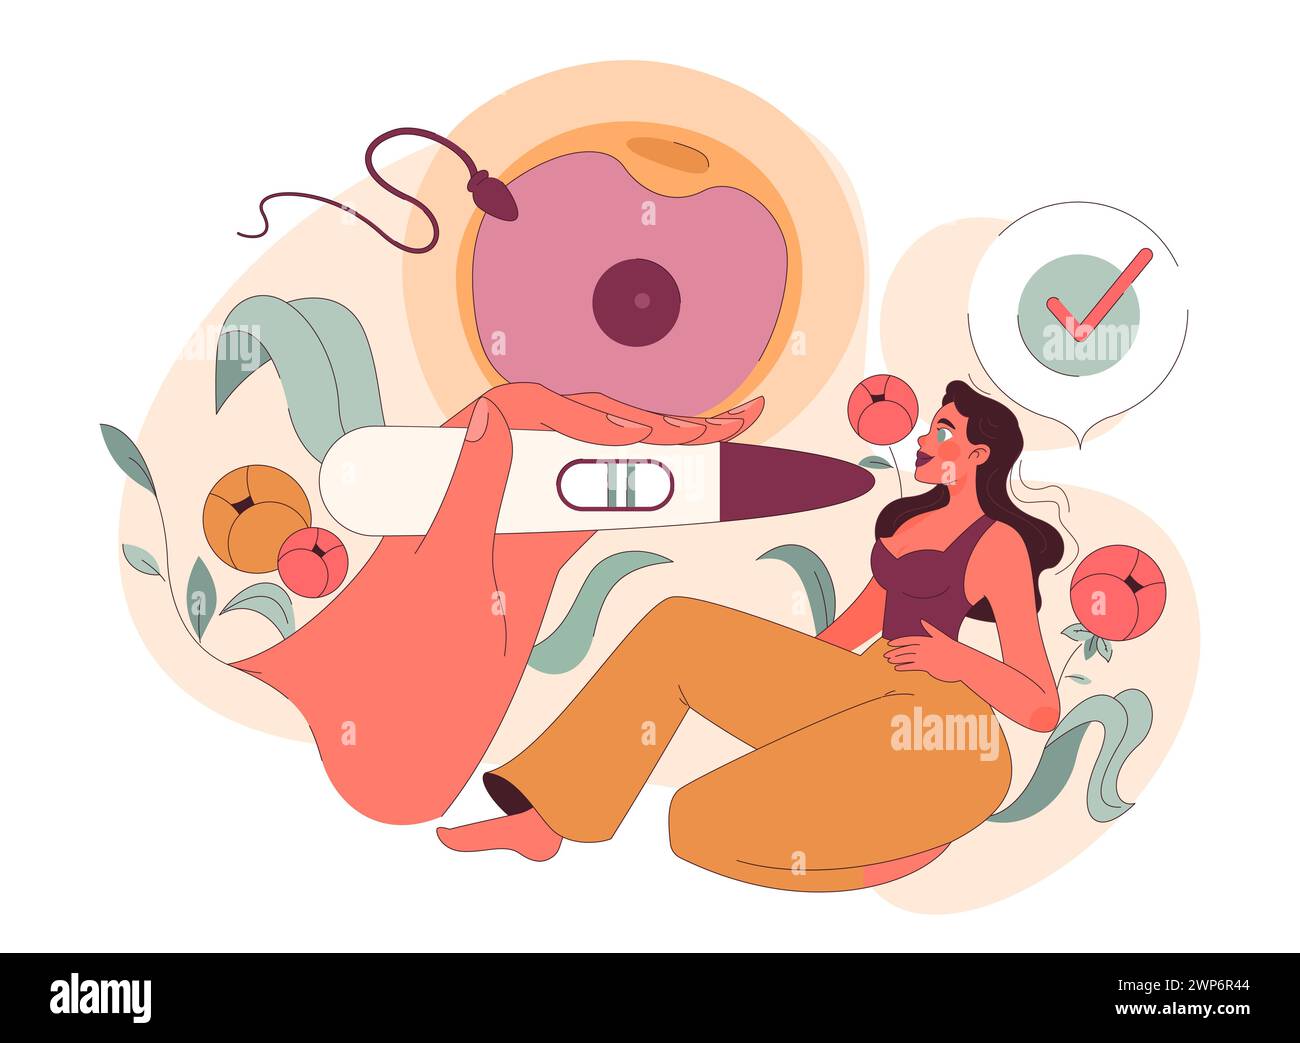 Fertility concept. A thoughtful woman amidst symbolic illustrations of ovulation, positive pregnancy test, and a fertilized egg. Embracing the journey of womanhood. Flat vector illustration. Stock Vector